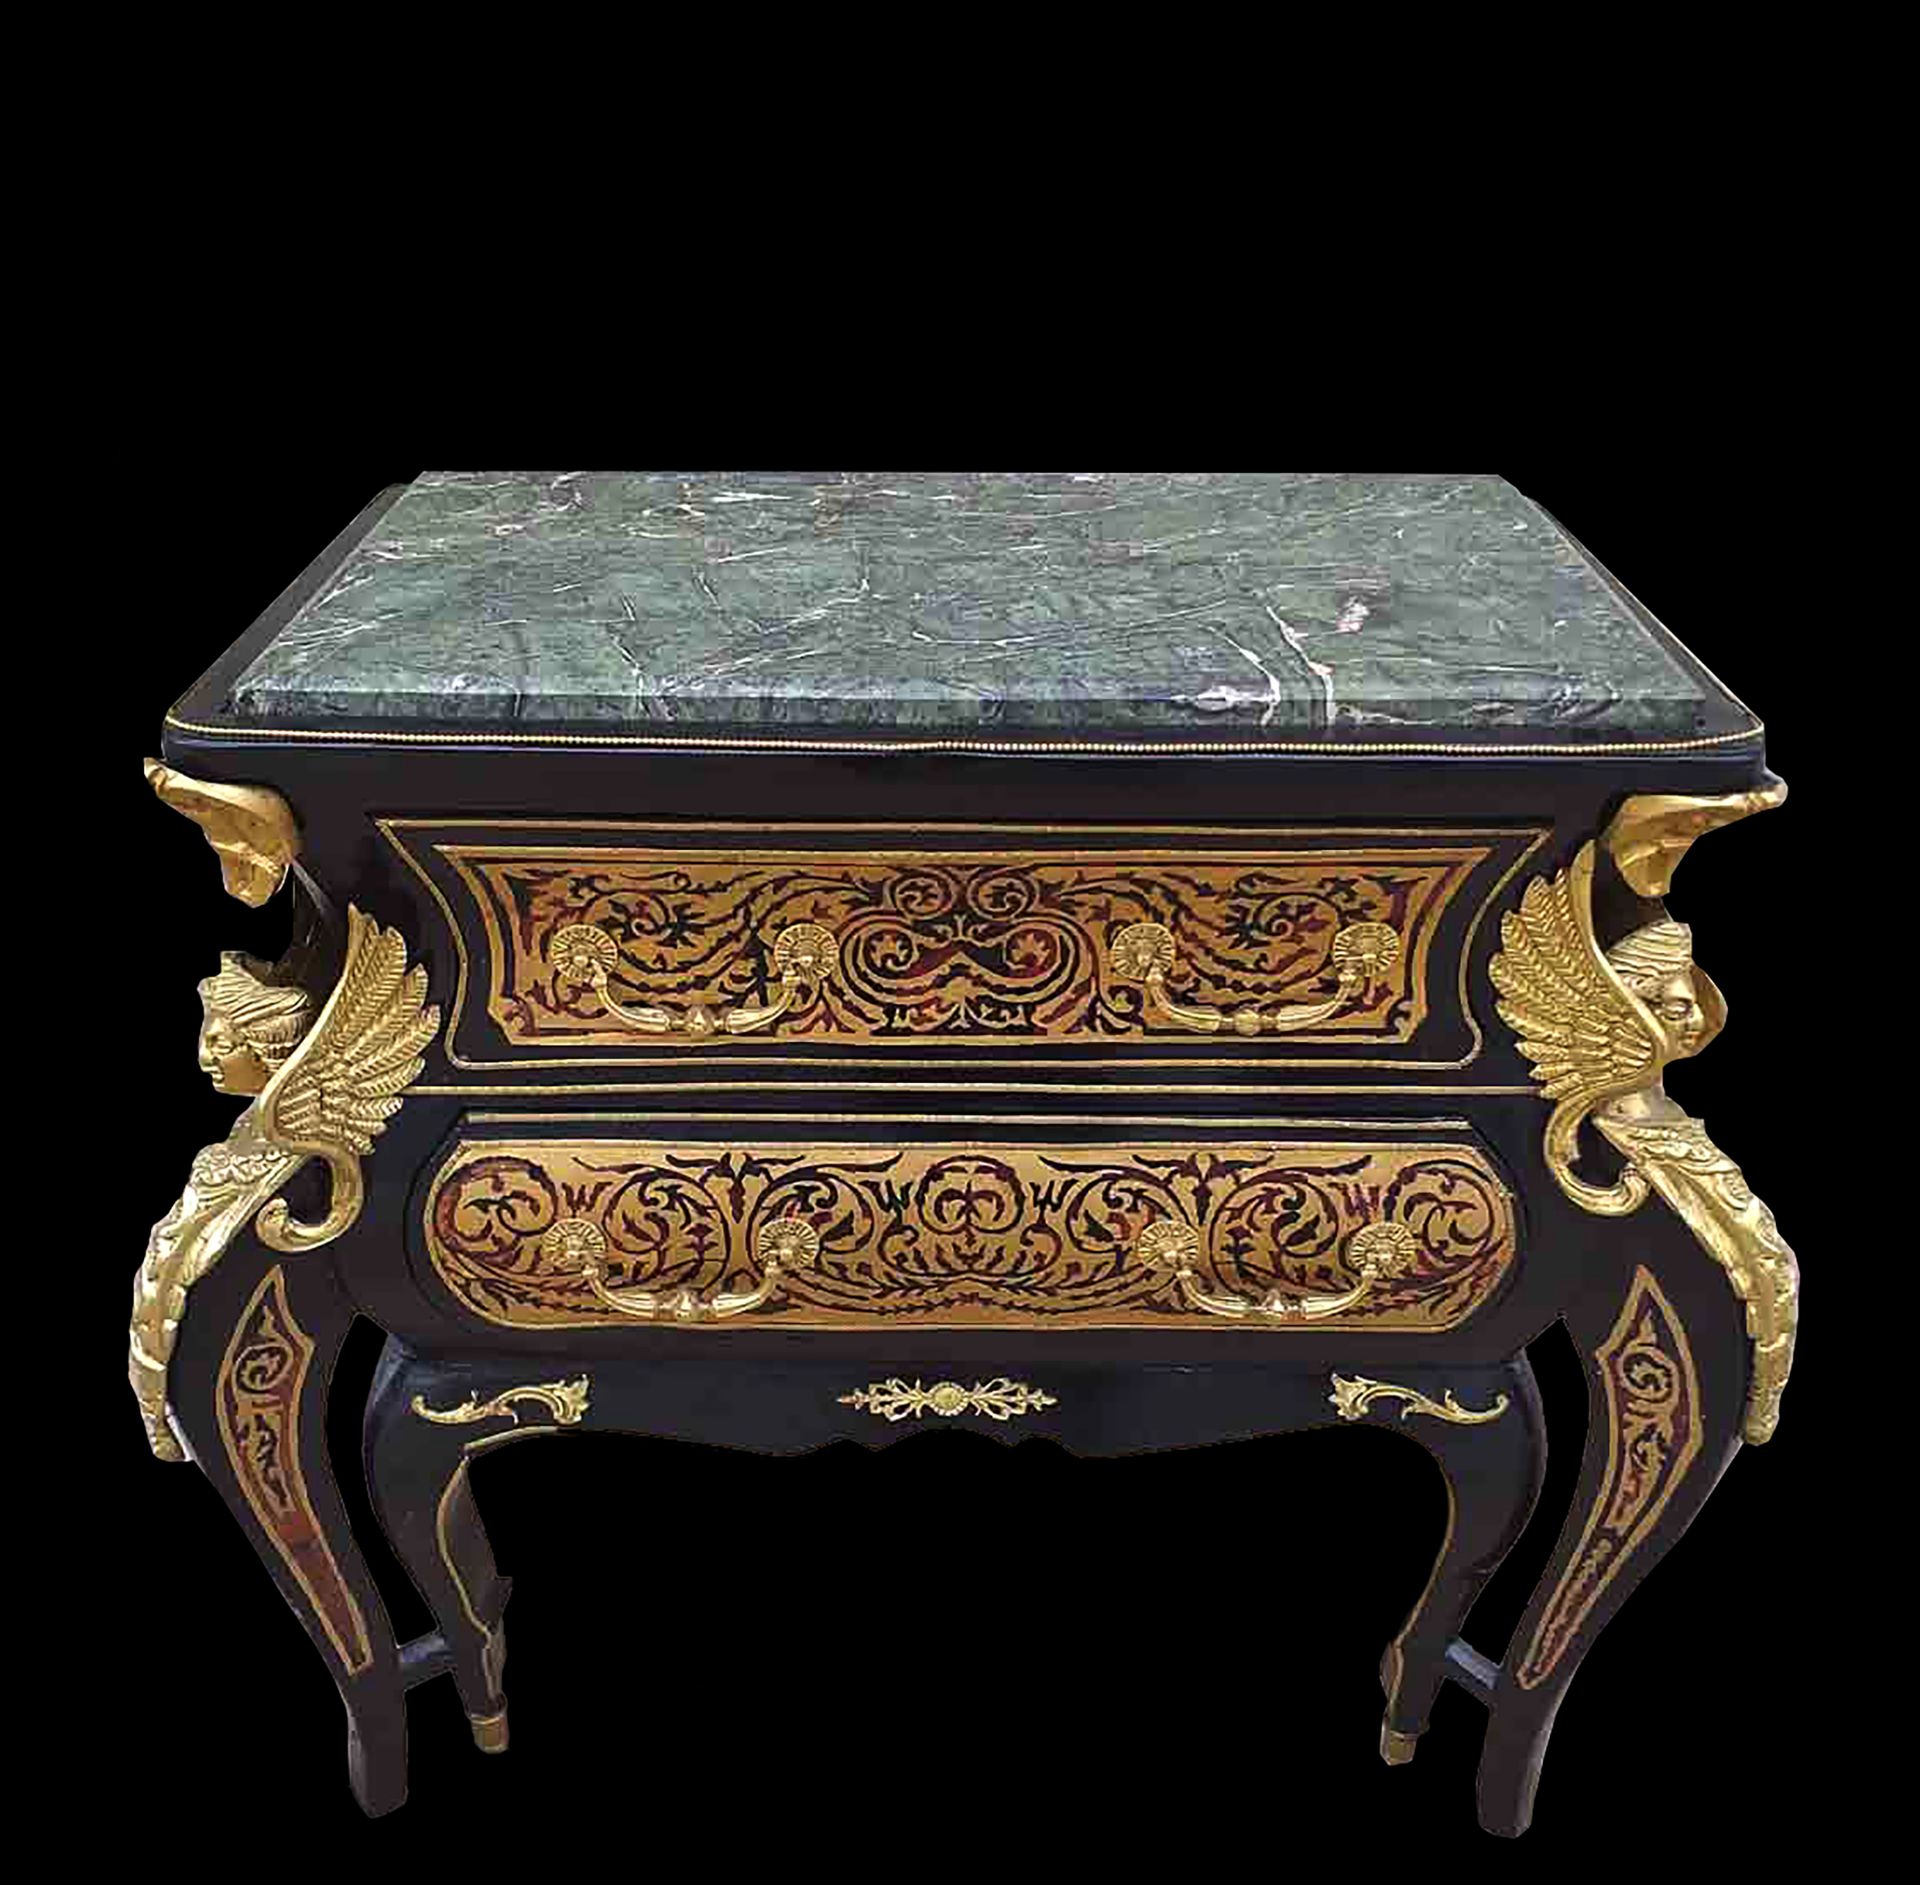 Chest of drawers Boulle style French work table from the 19th - 20th centuries